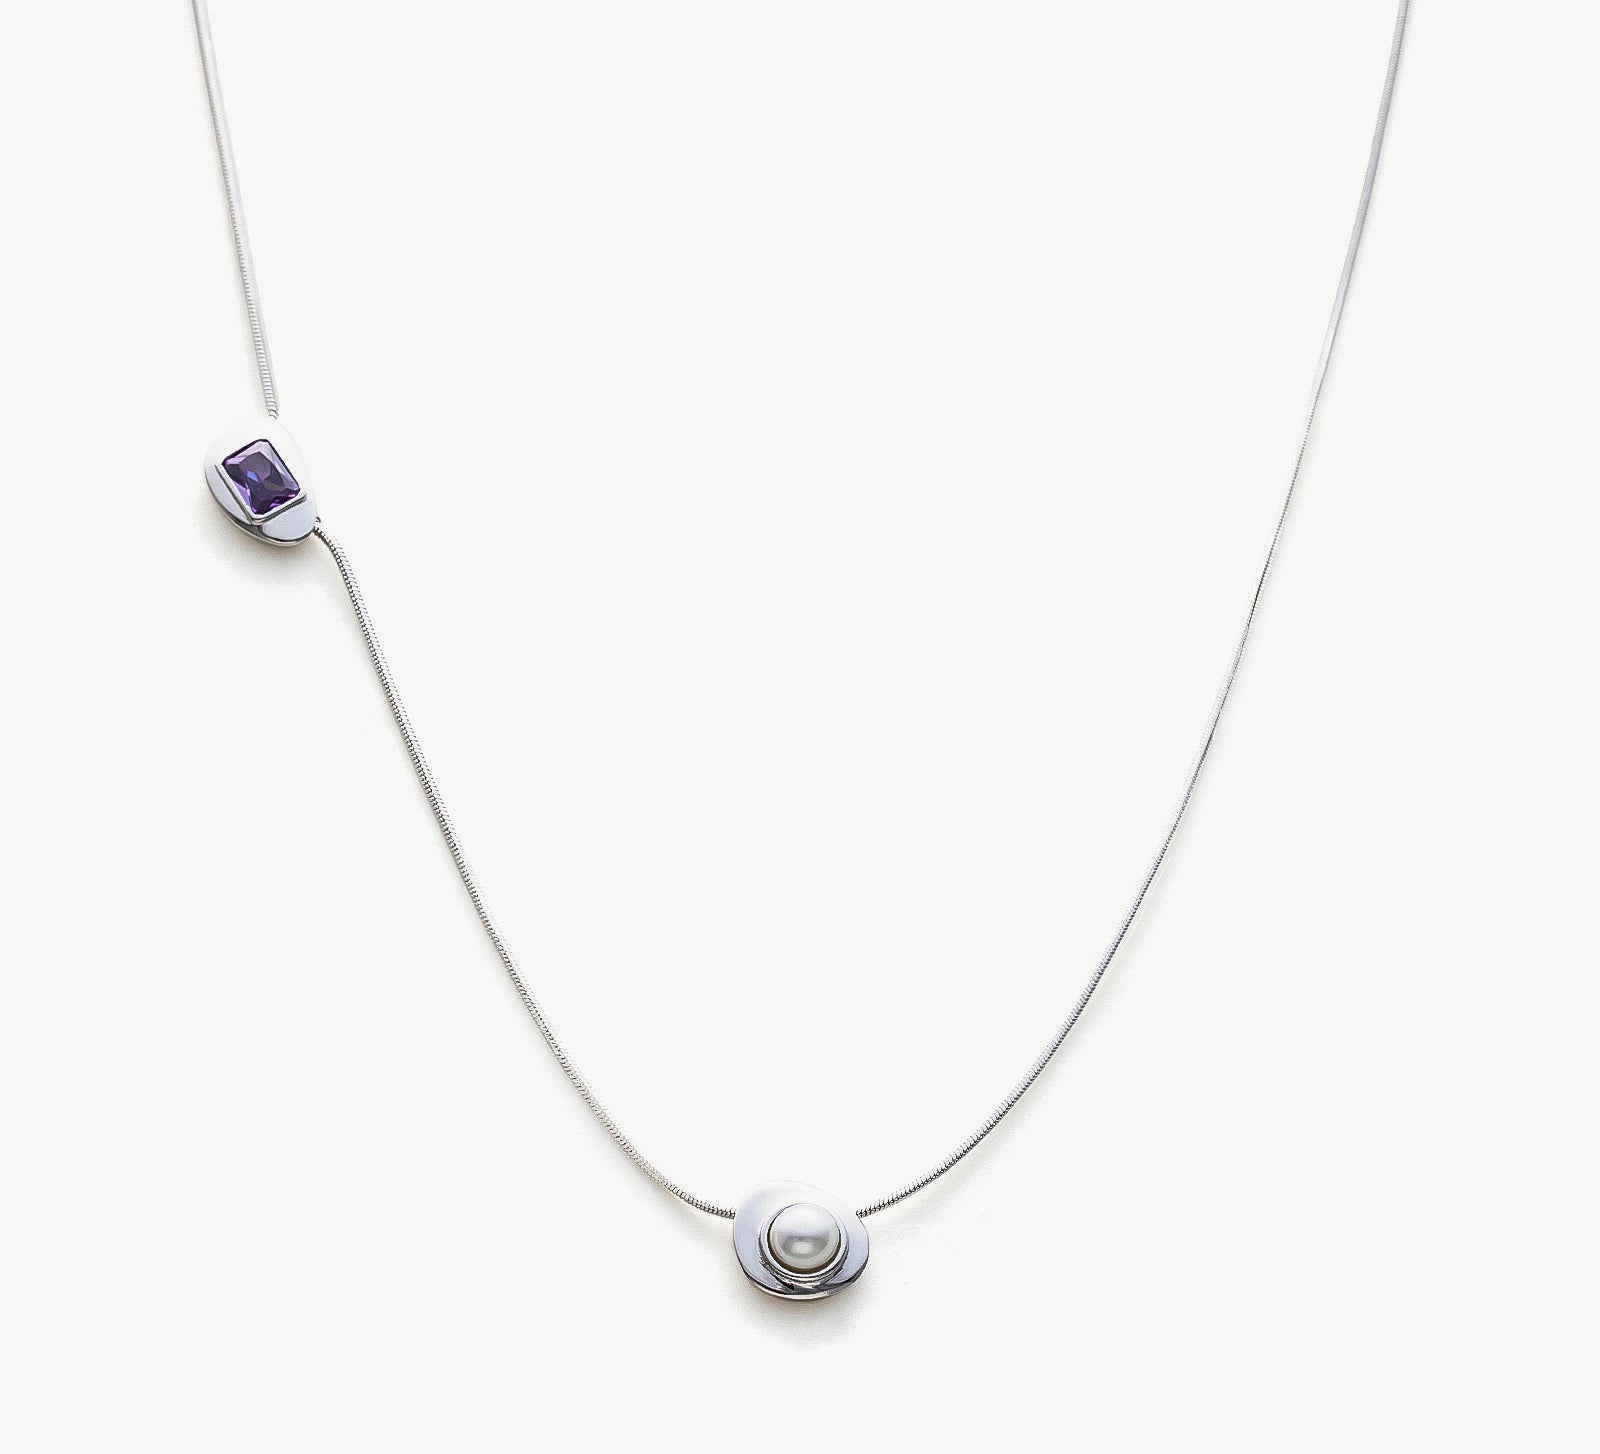 Platinum Crystal Drop Necklace with a captivating sapphire crystal pendant, showcasing a sophisticated and radiant design on a platinum chain, adding a touch of glamour and sophistication to your ensemble.